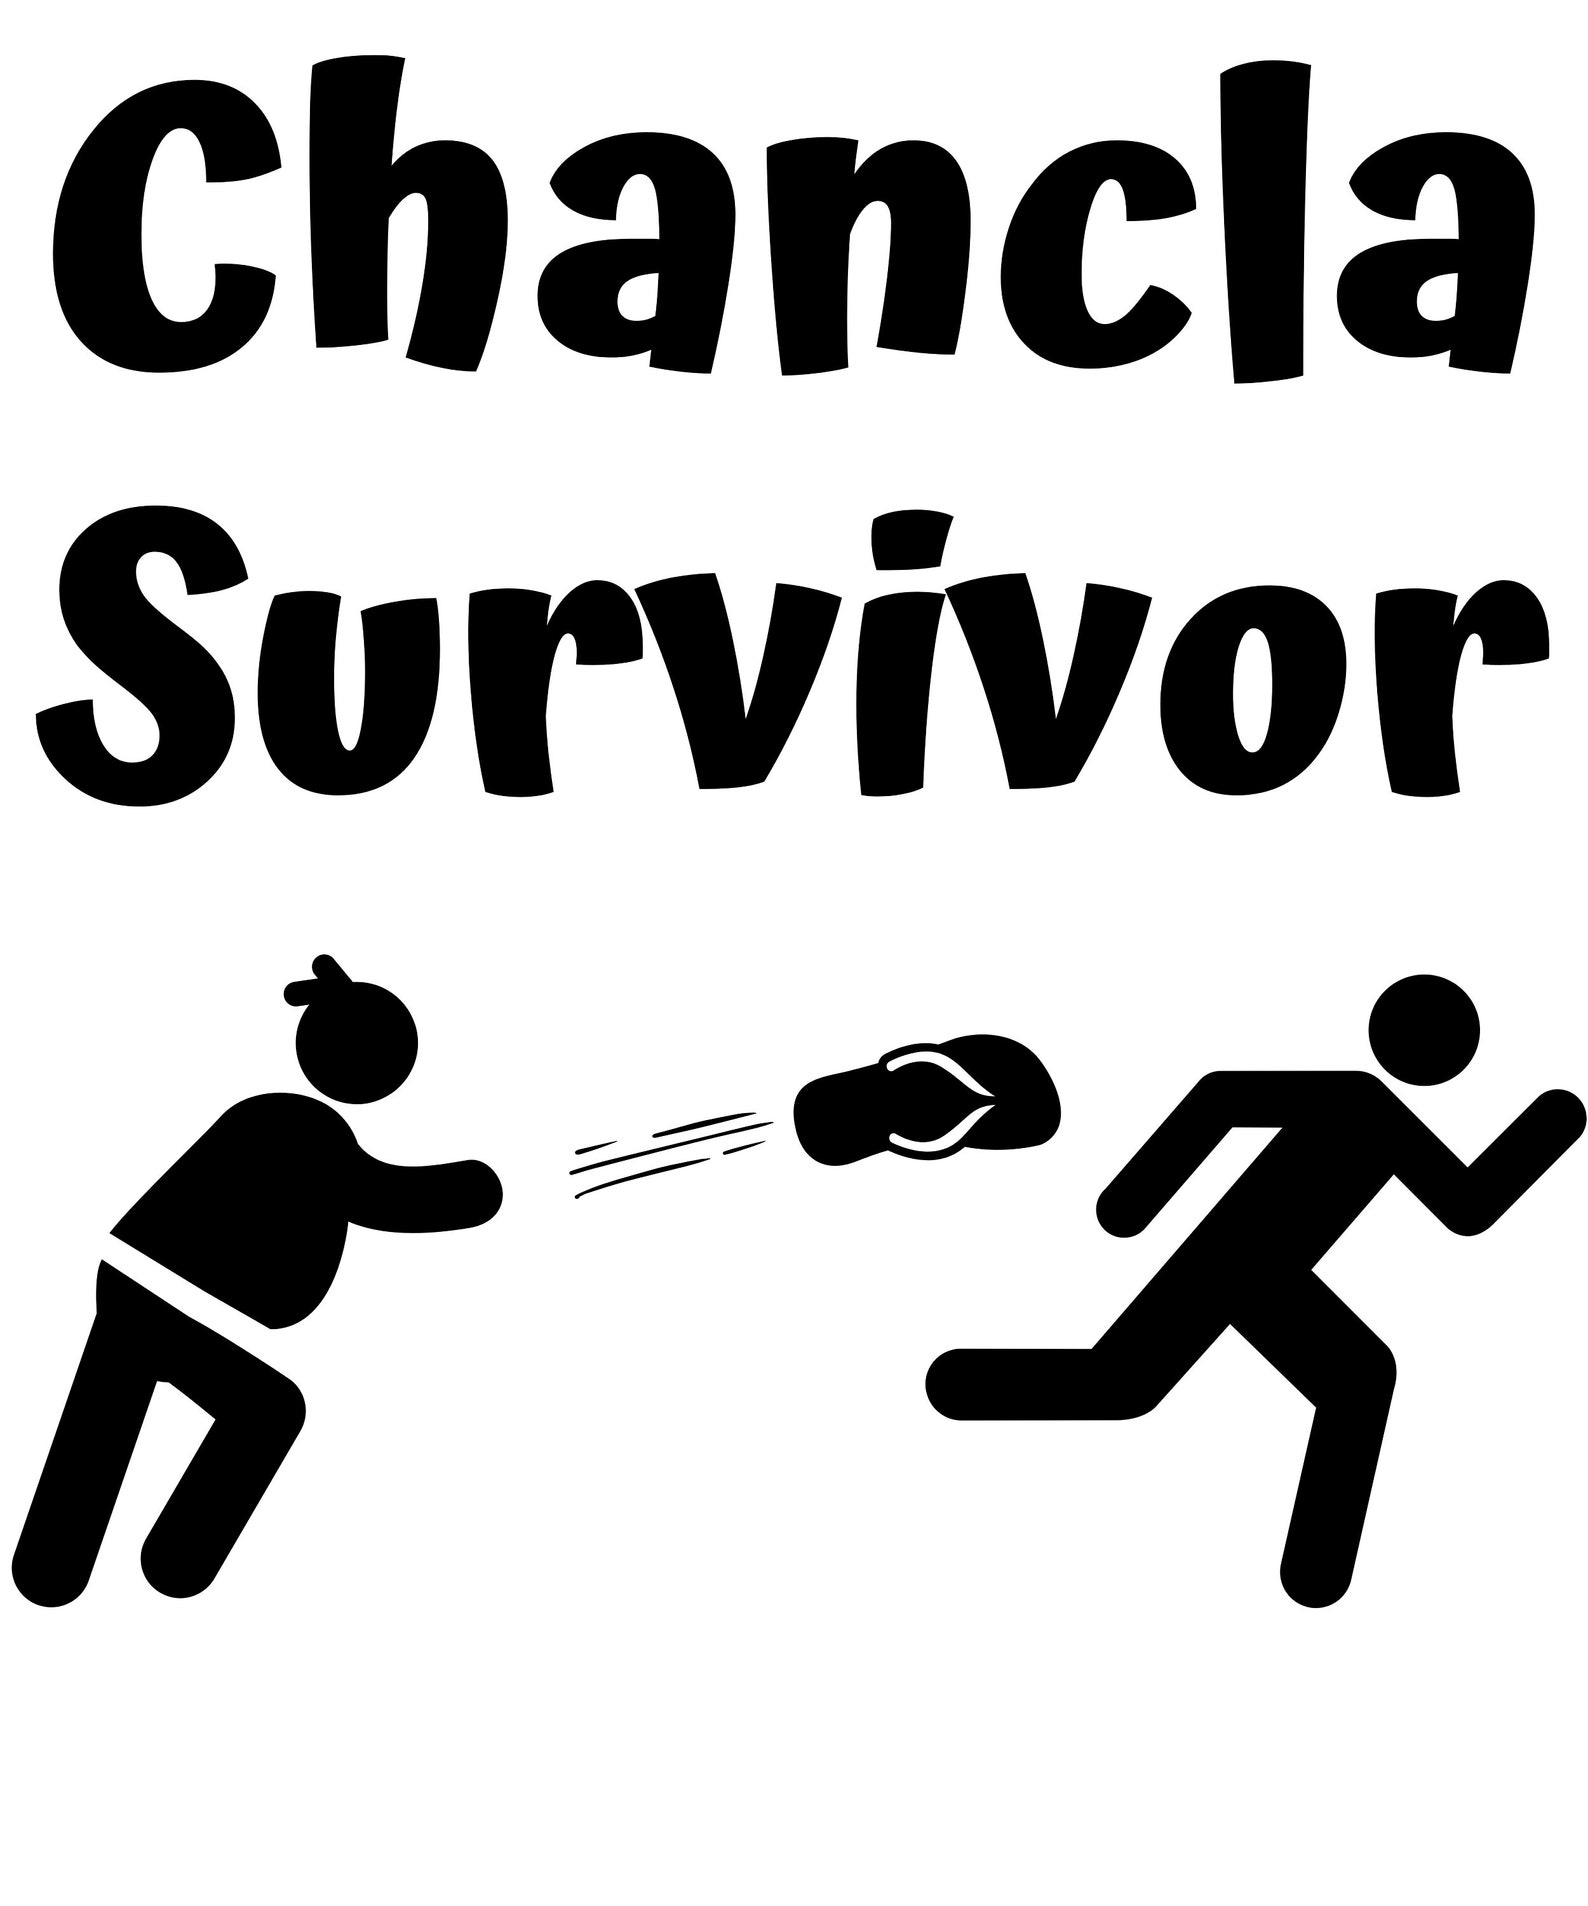 Chancla Survivor Png Chancla Chancla Survivor Chancla Png - Etsy